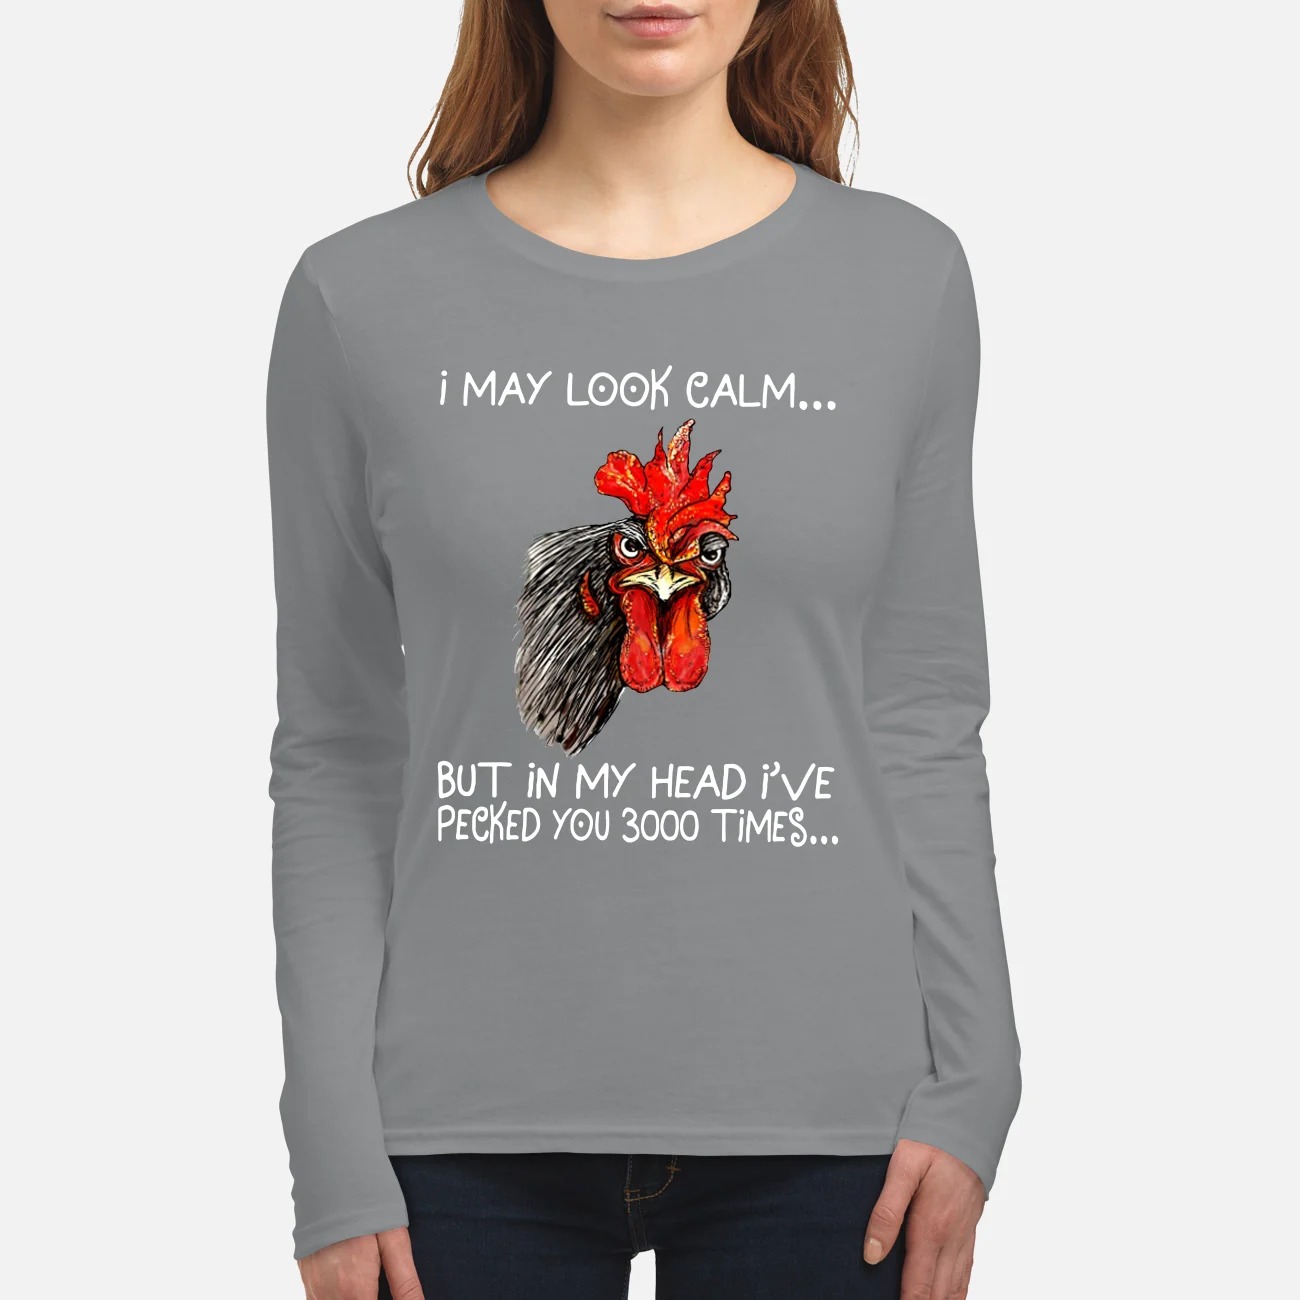 Chicken I may look calm but in my head I've pecked you 3000 times women's long sleeved shirt